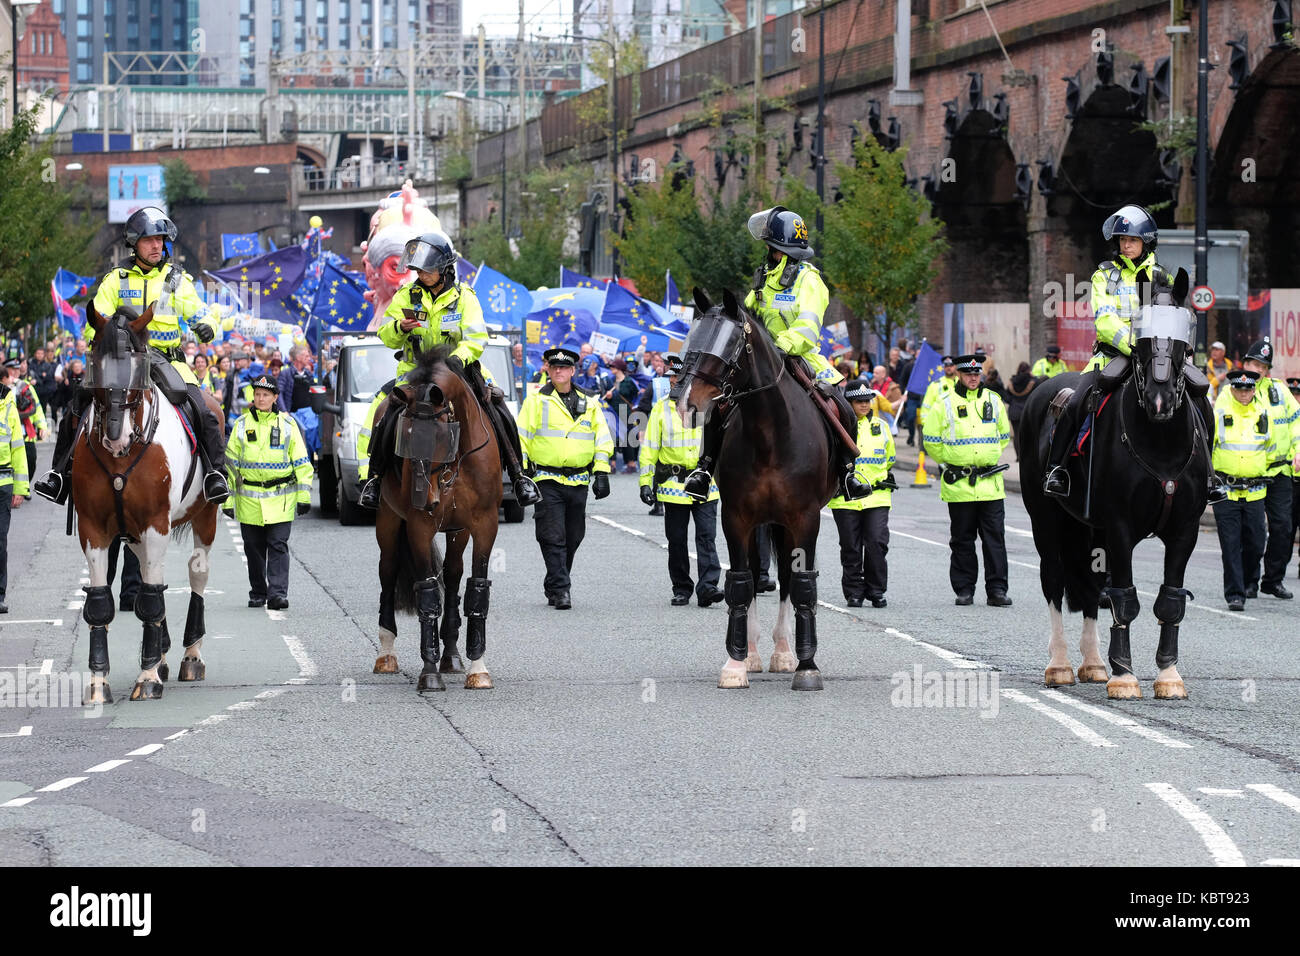 Stop Brexit march, Manchester city centre, Sunday 1st October 2017 - Large protest by thousands of Stop Brexit supporters through the city centre of Manchester on the opening day of the Conservative Party Conference.  Steven May / Alamy Live News Stock Photo